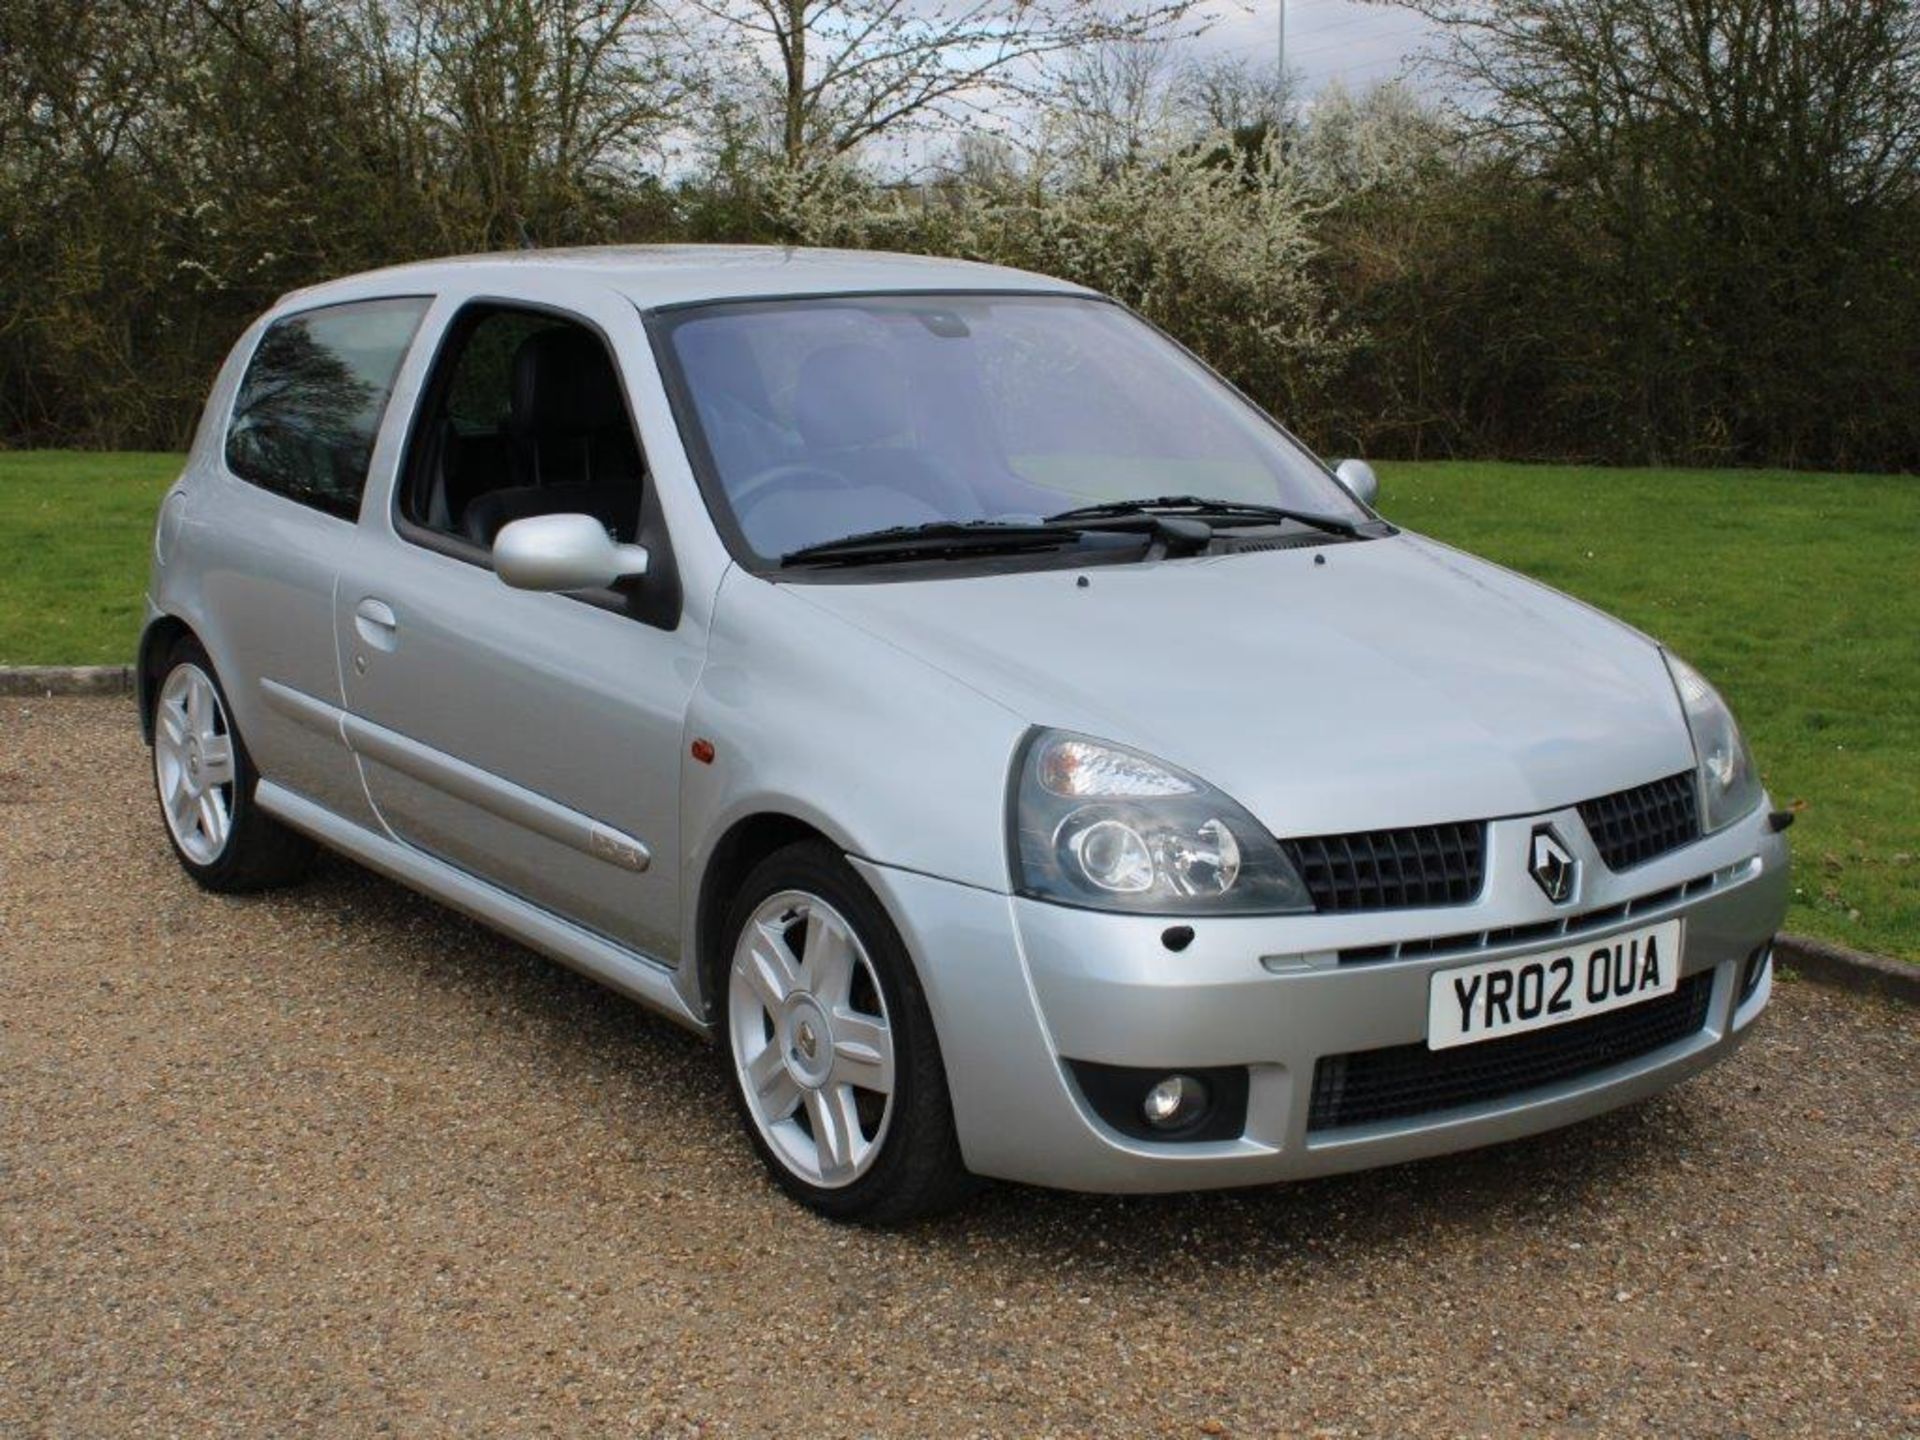 2002 Renault Clio 2.0 Sport 172 15,050 miles from new